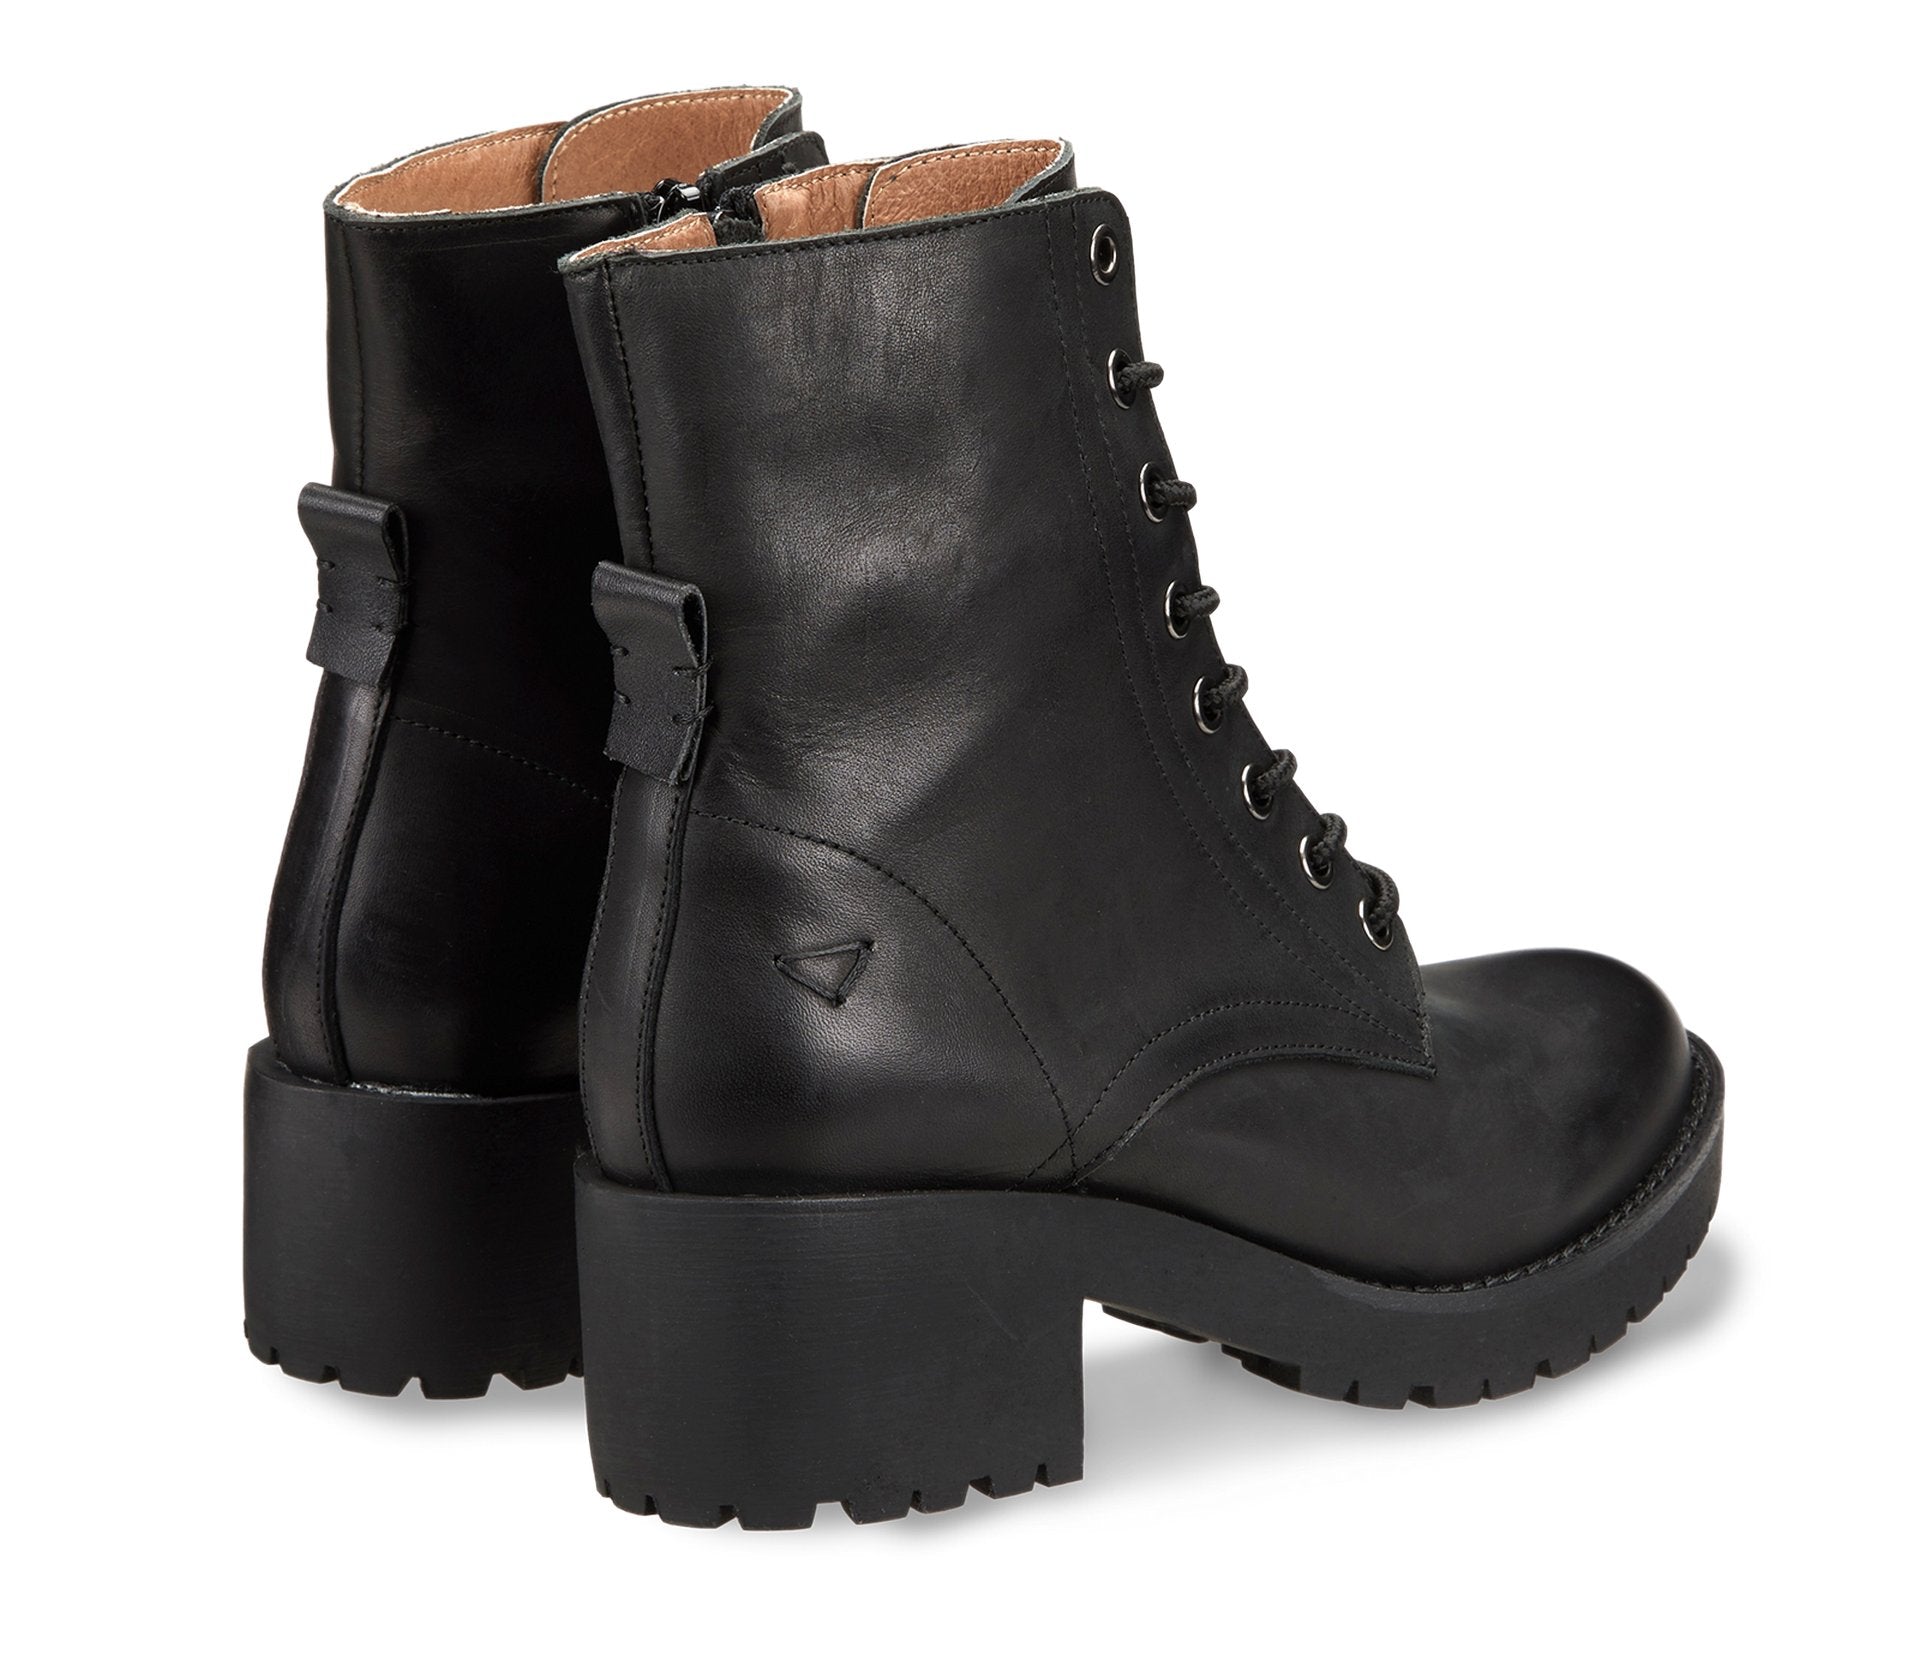 Women's black leather ankle boot